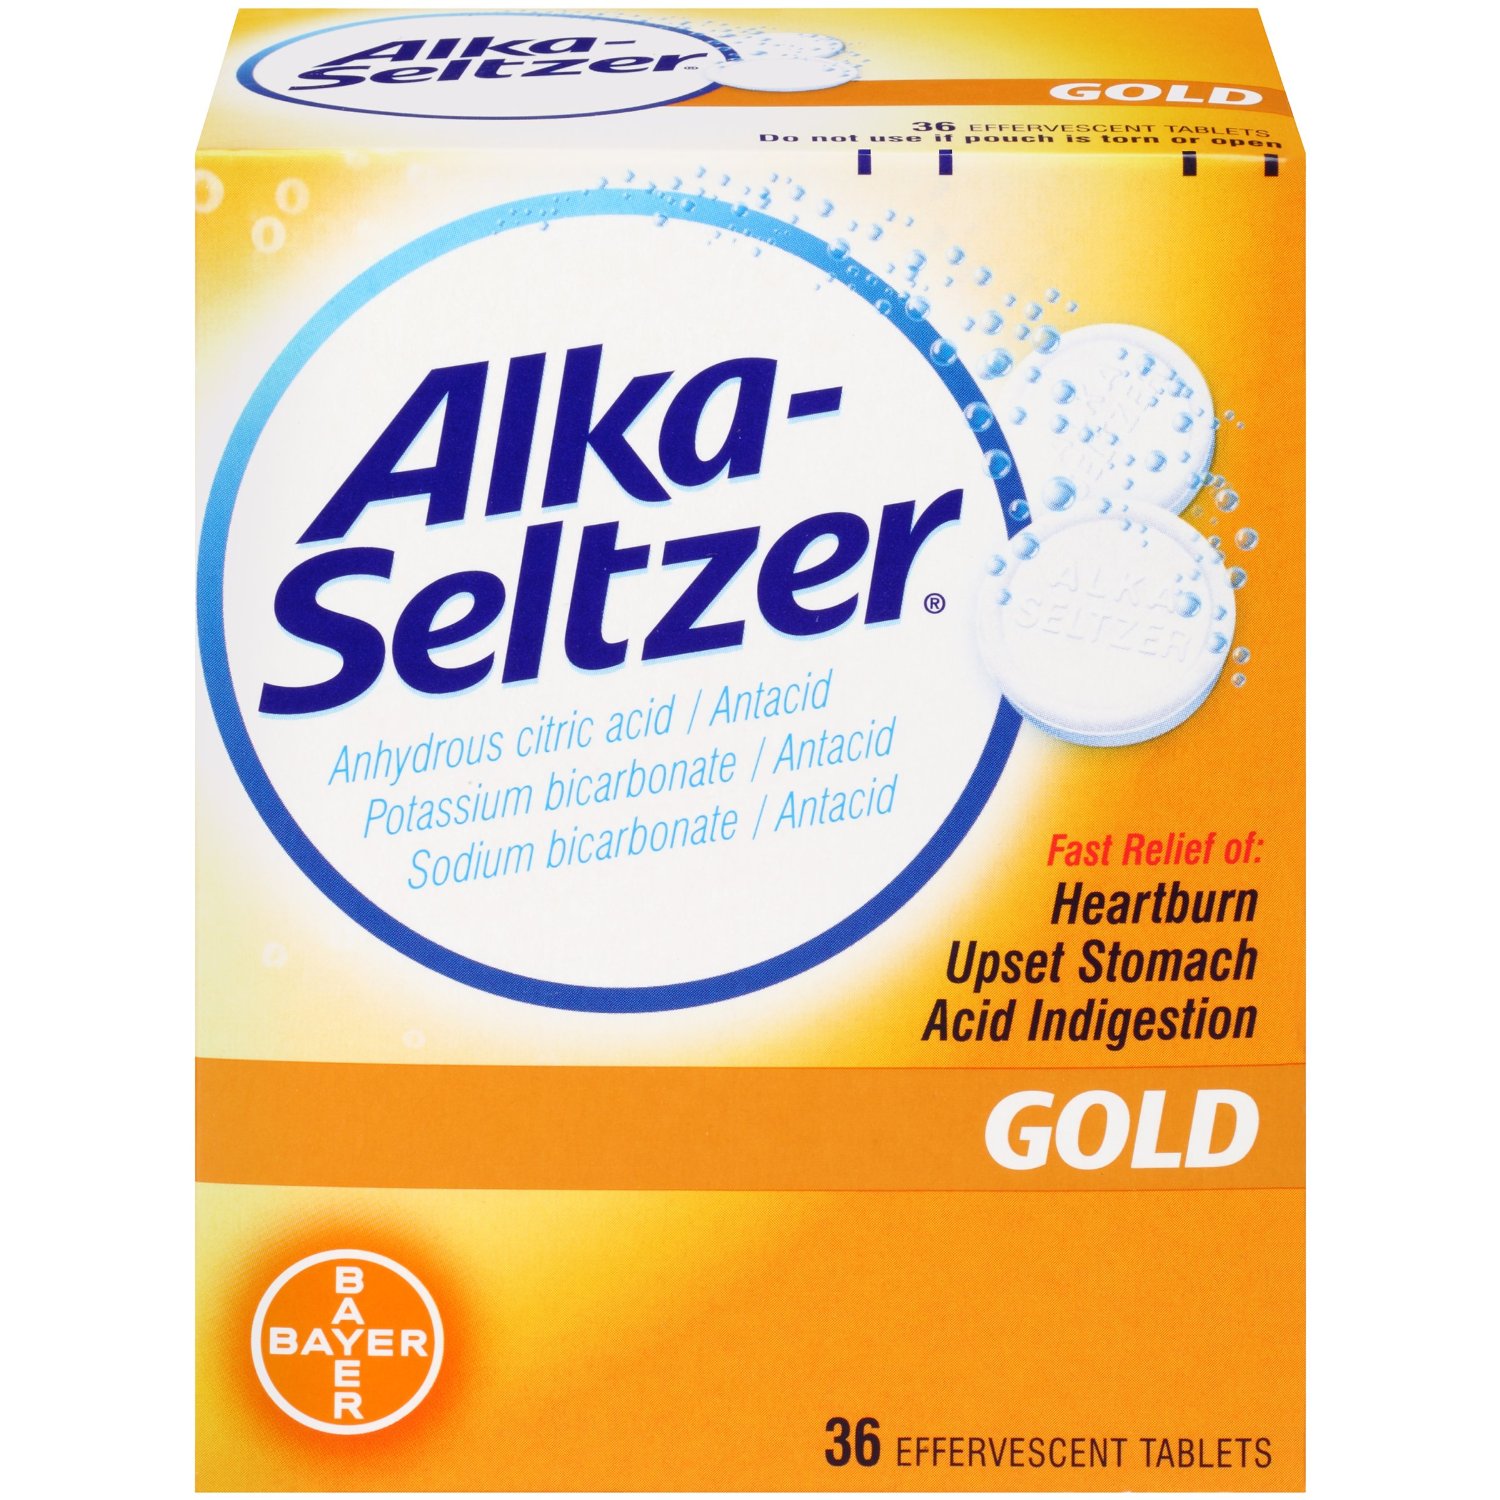 Alka-Seltzer Gold Tablets- Non-Aspirin, 36 Count Box - image 1 of 1